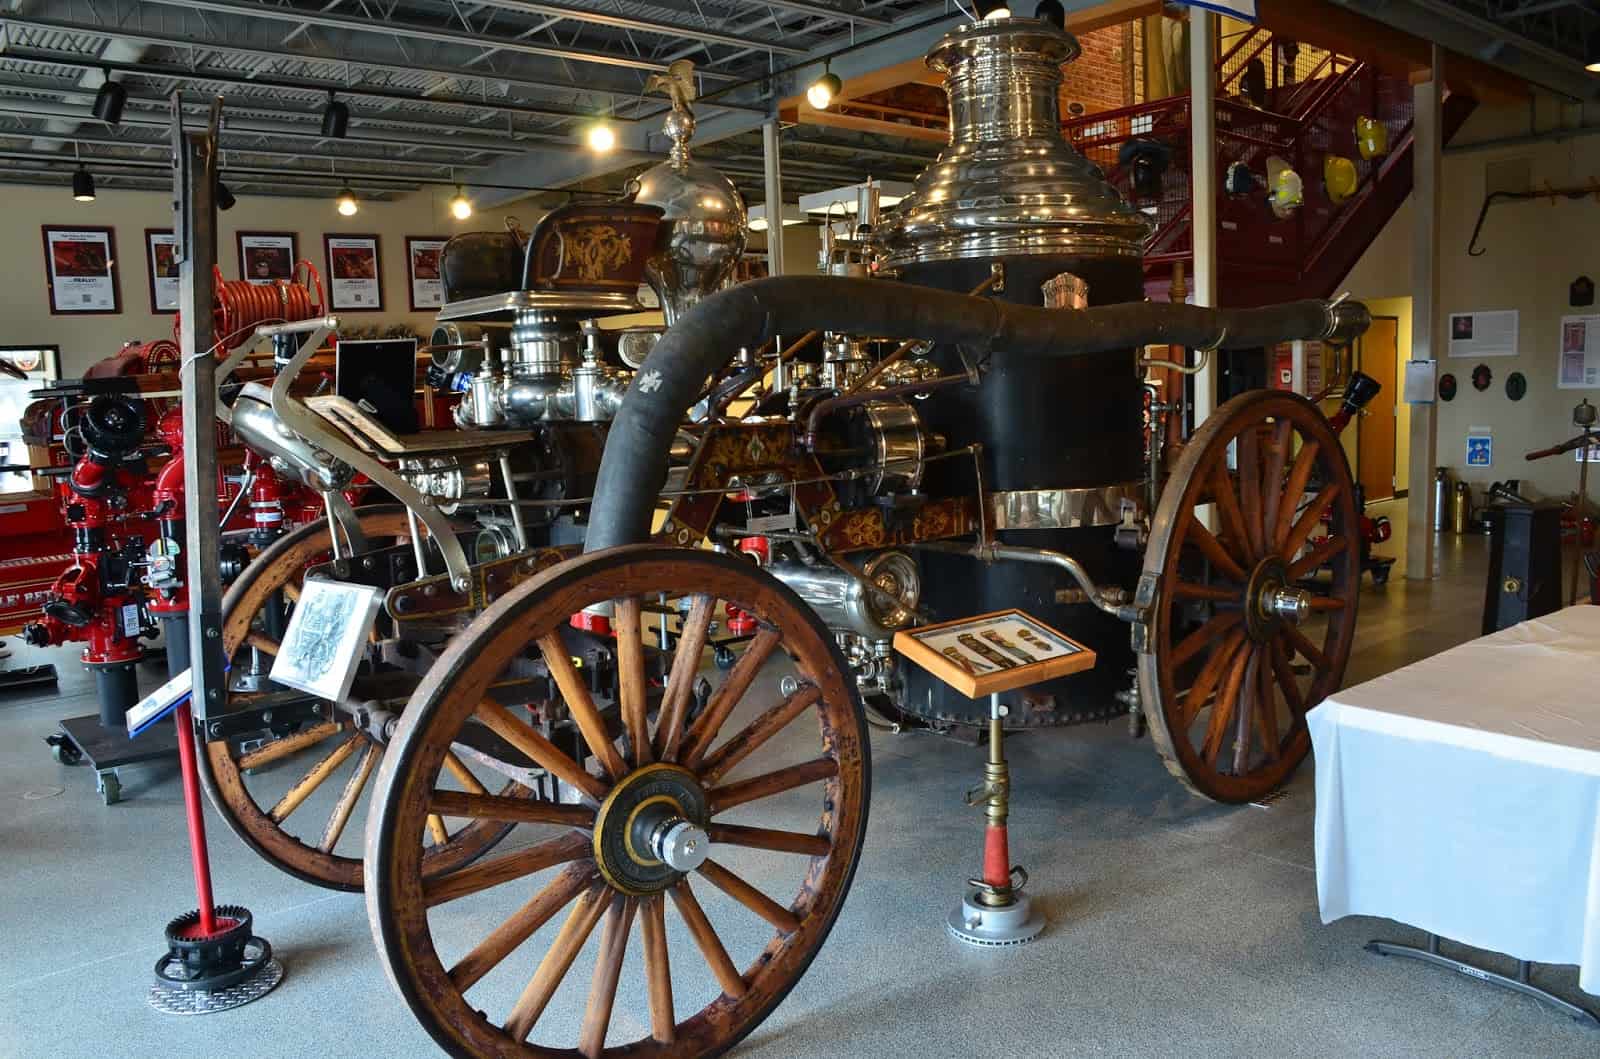 1890 Silsby Steam Engine at the Valparaiso Fire Museum in Valparaiso, Indiana